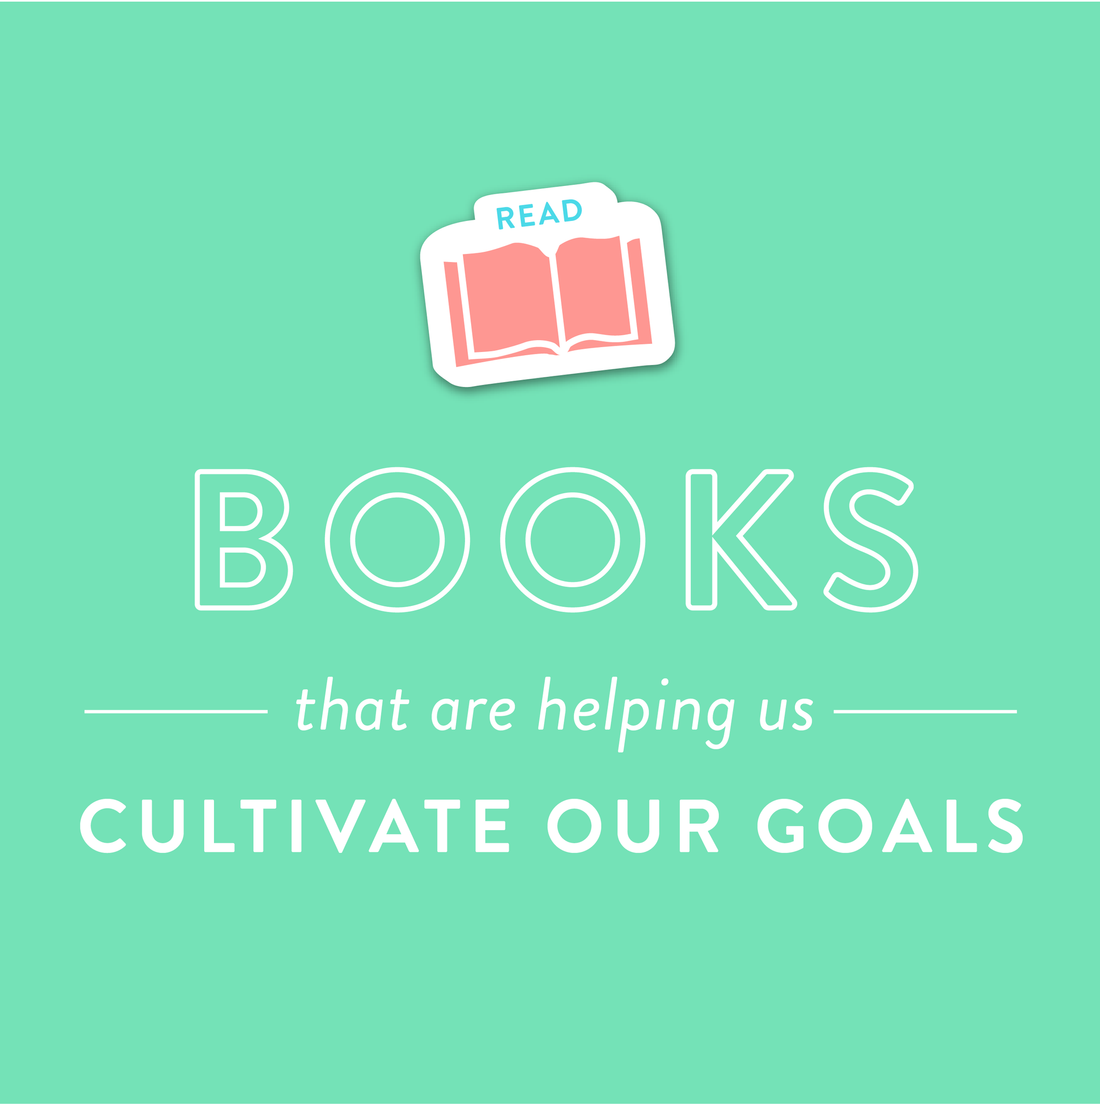 Recommended Reading: What We’re Reading to Cultivate Our Goals